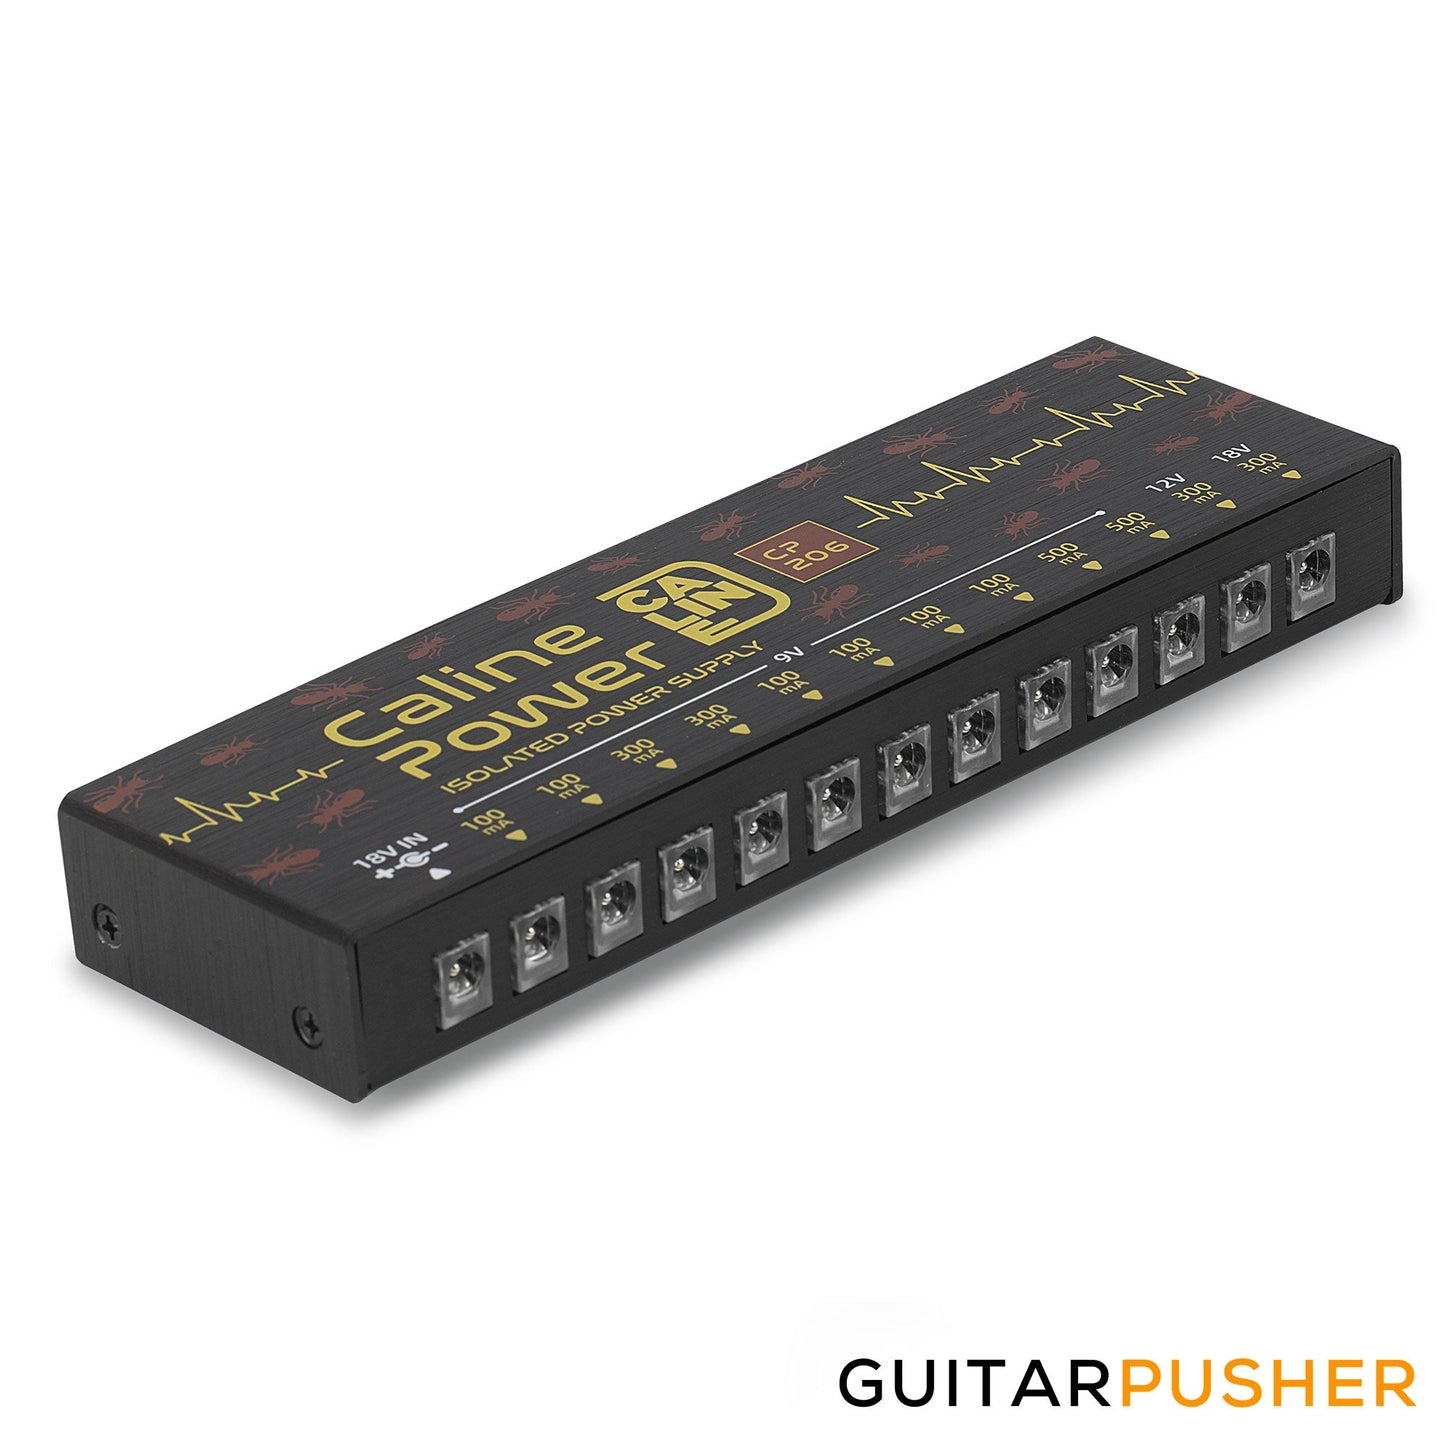 Caline Power Isolated Output CP-206